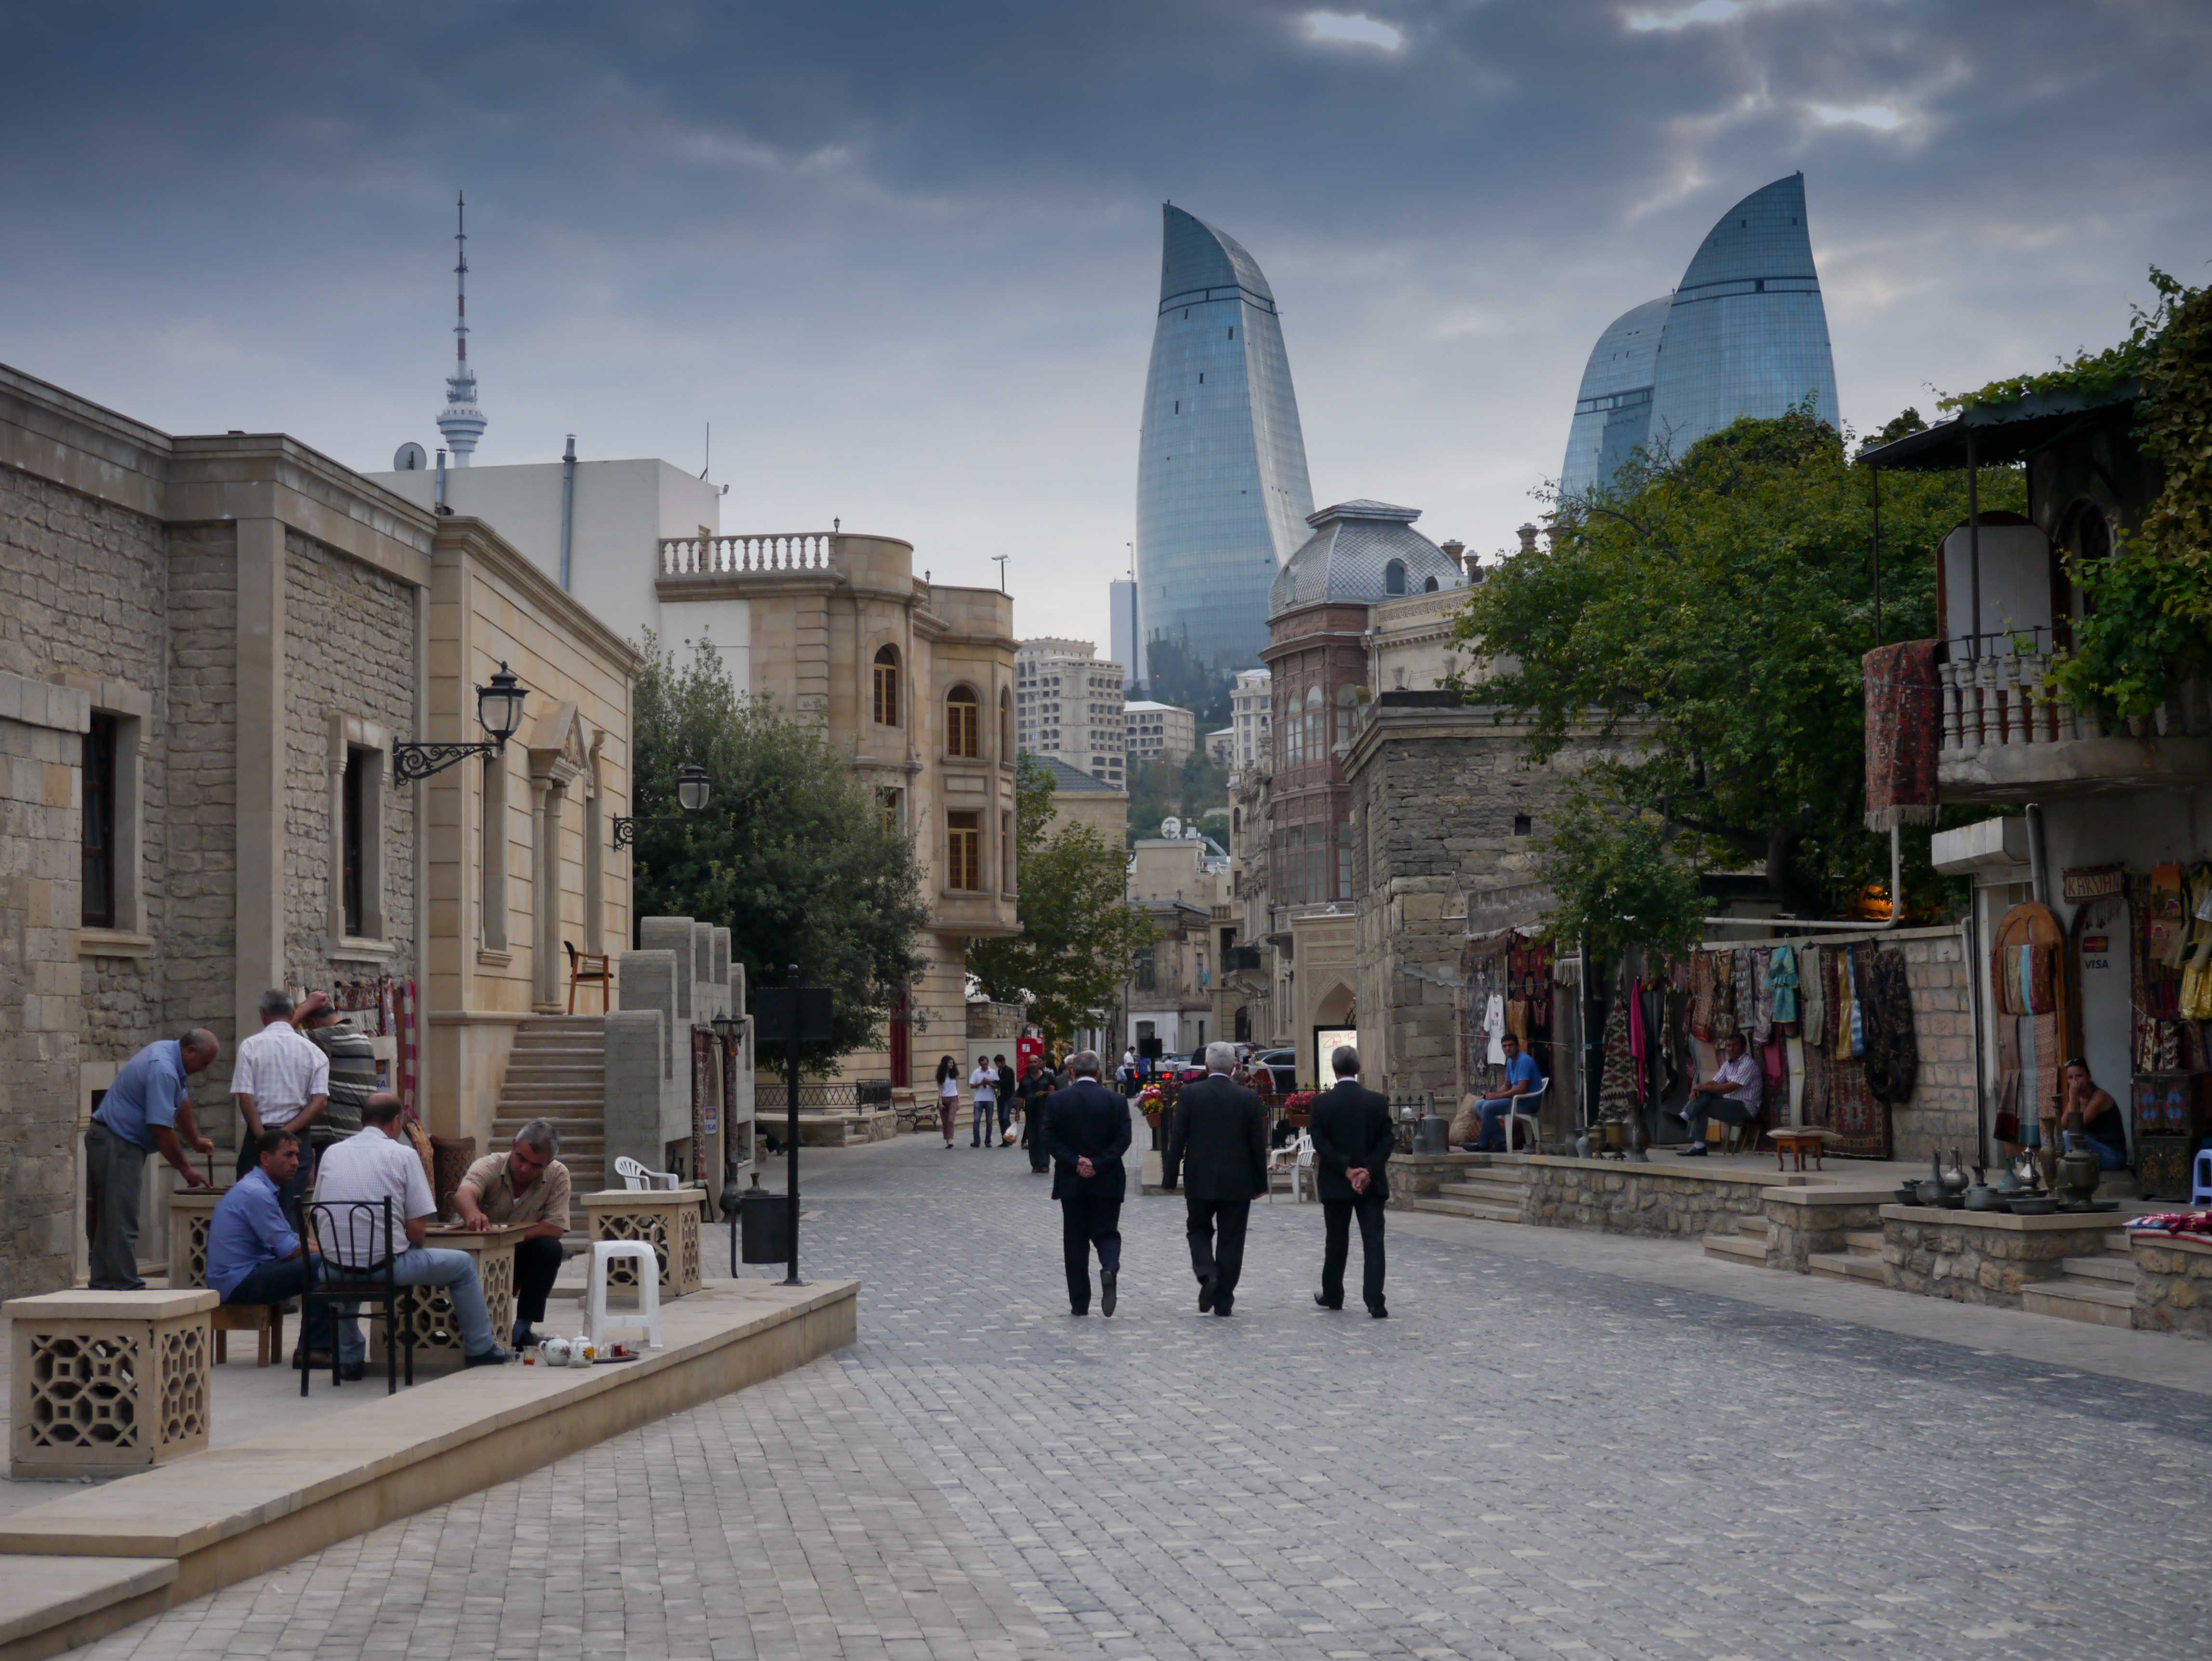 Visitors of Baku 2015 to be safe and sound